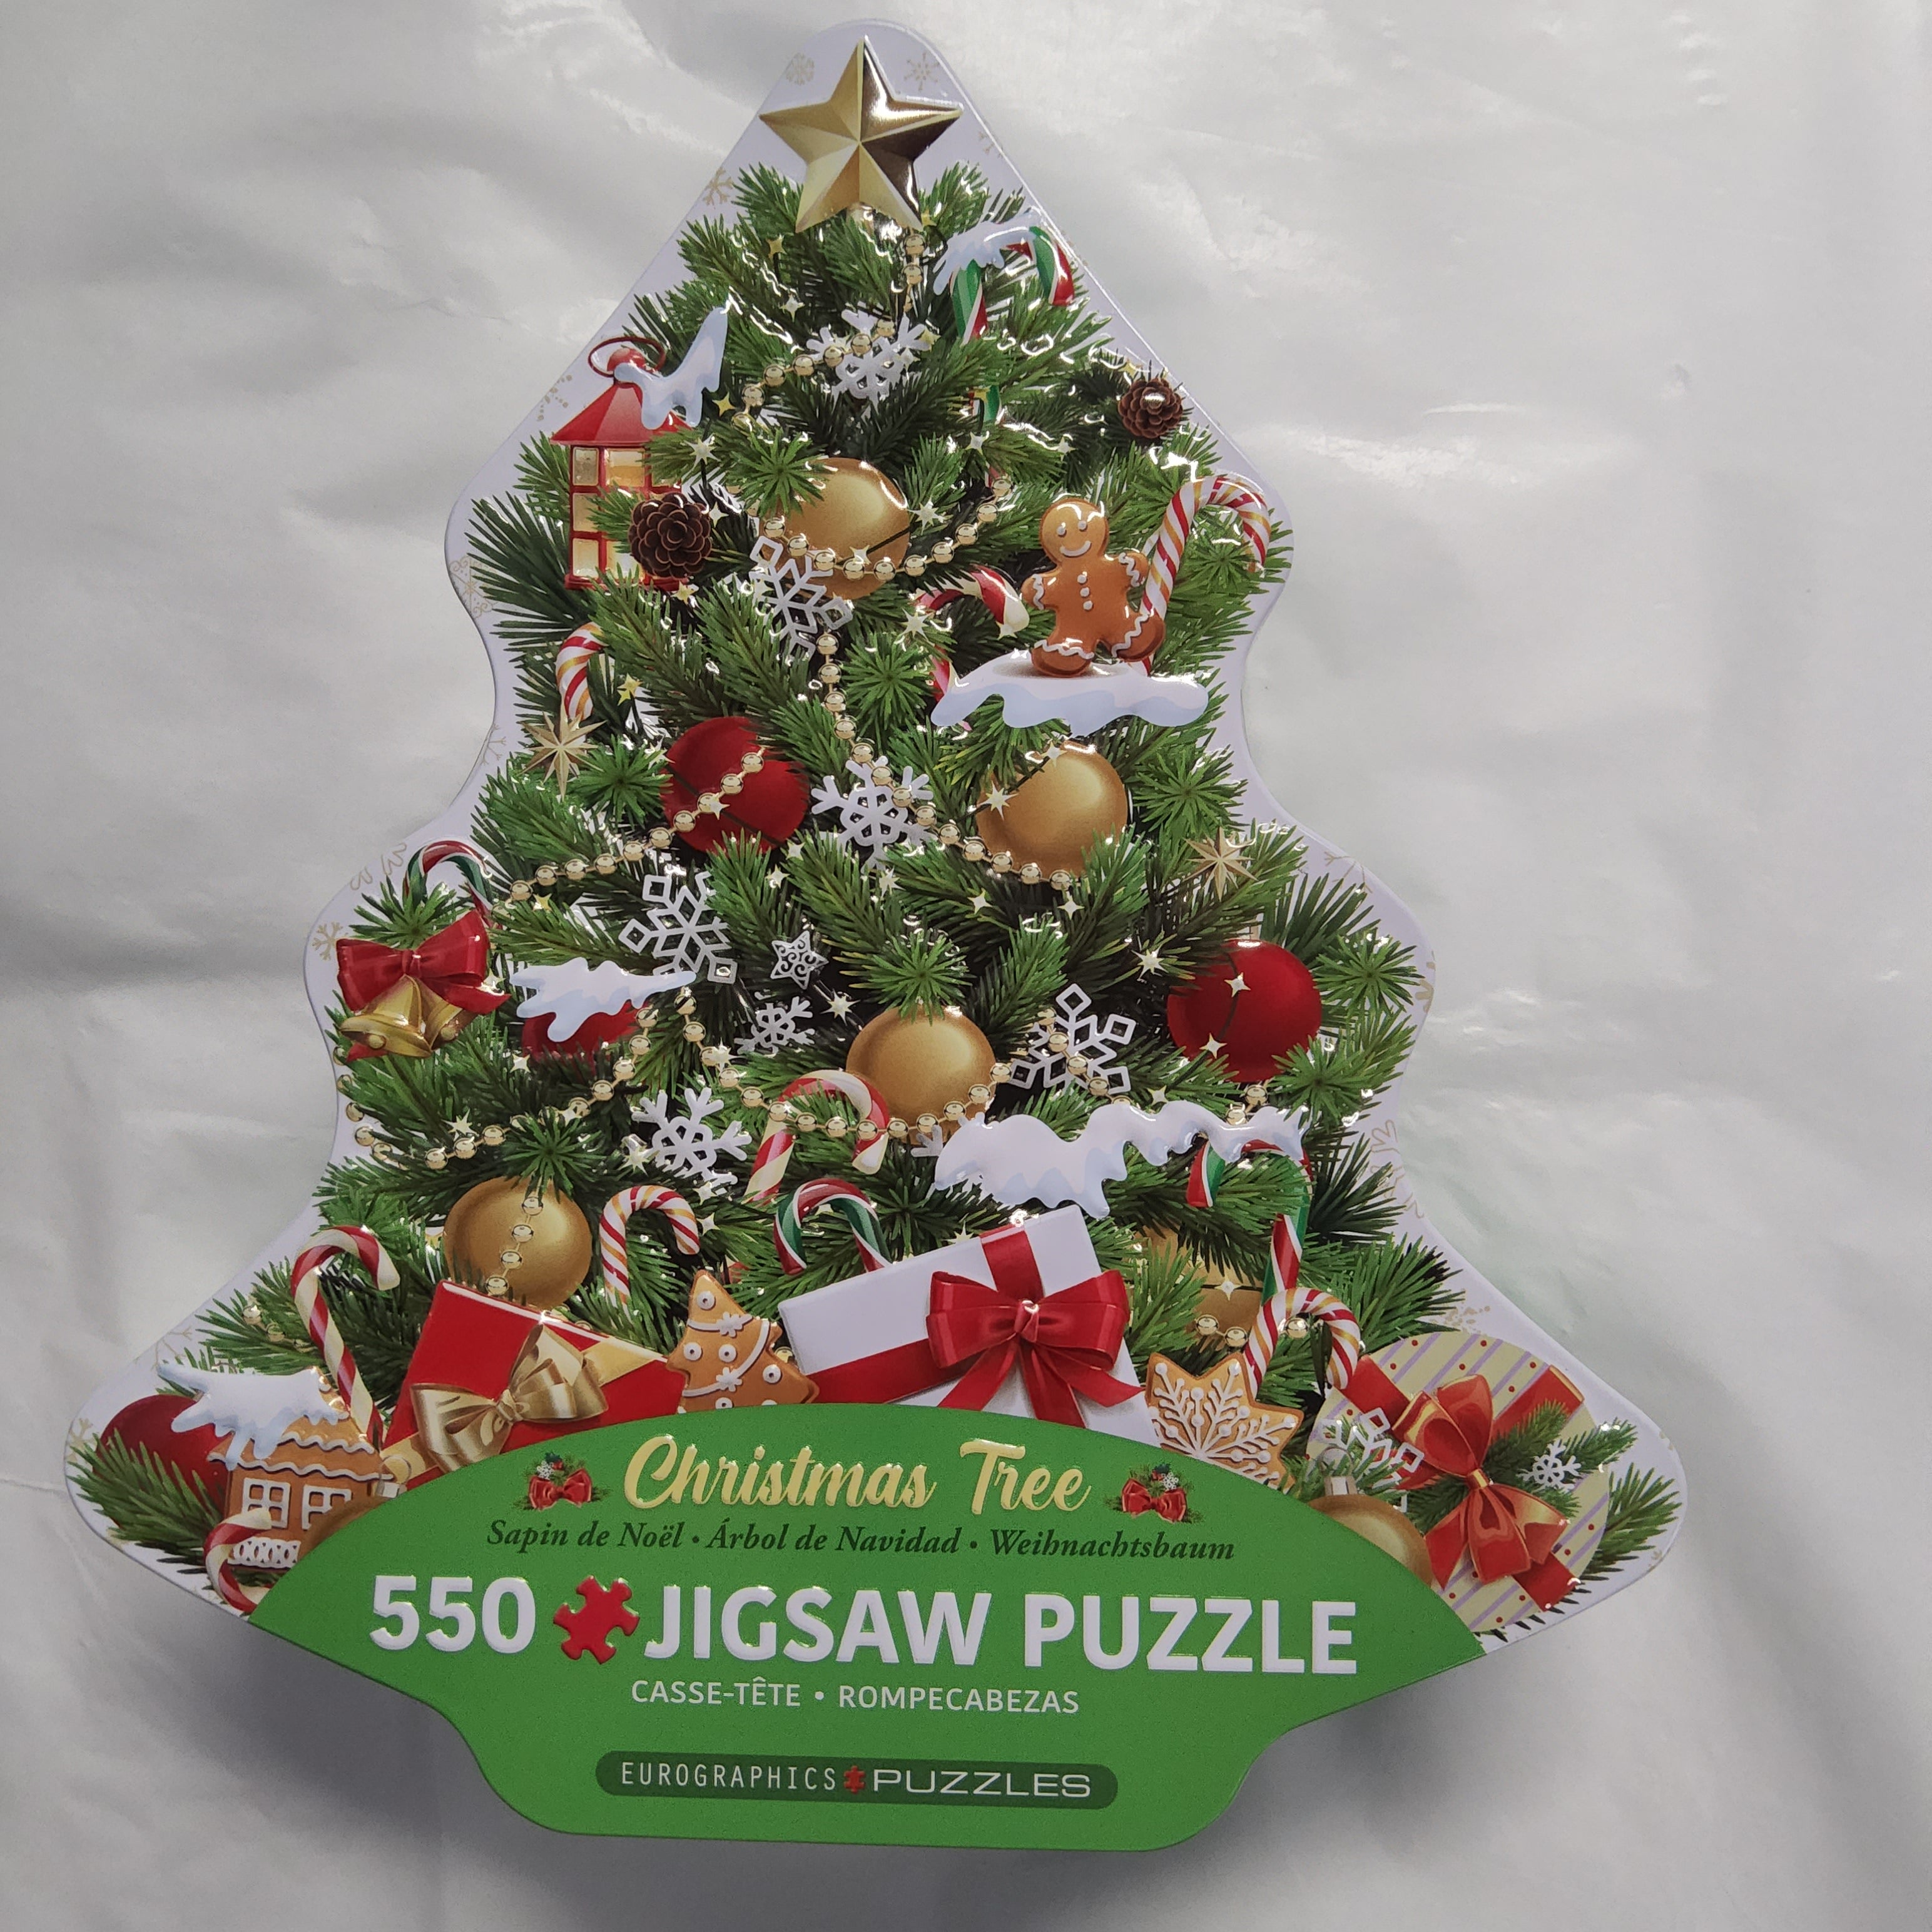 Eurographics Puzzle - Collectible Tin - Christmas Tree - 550 pieces - 8551-5663